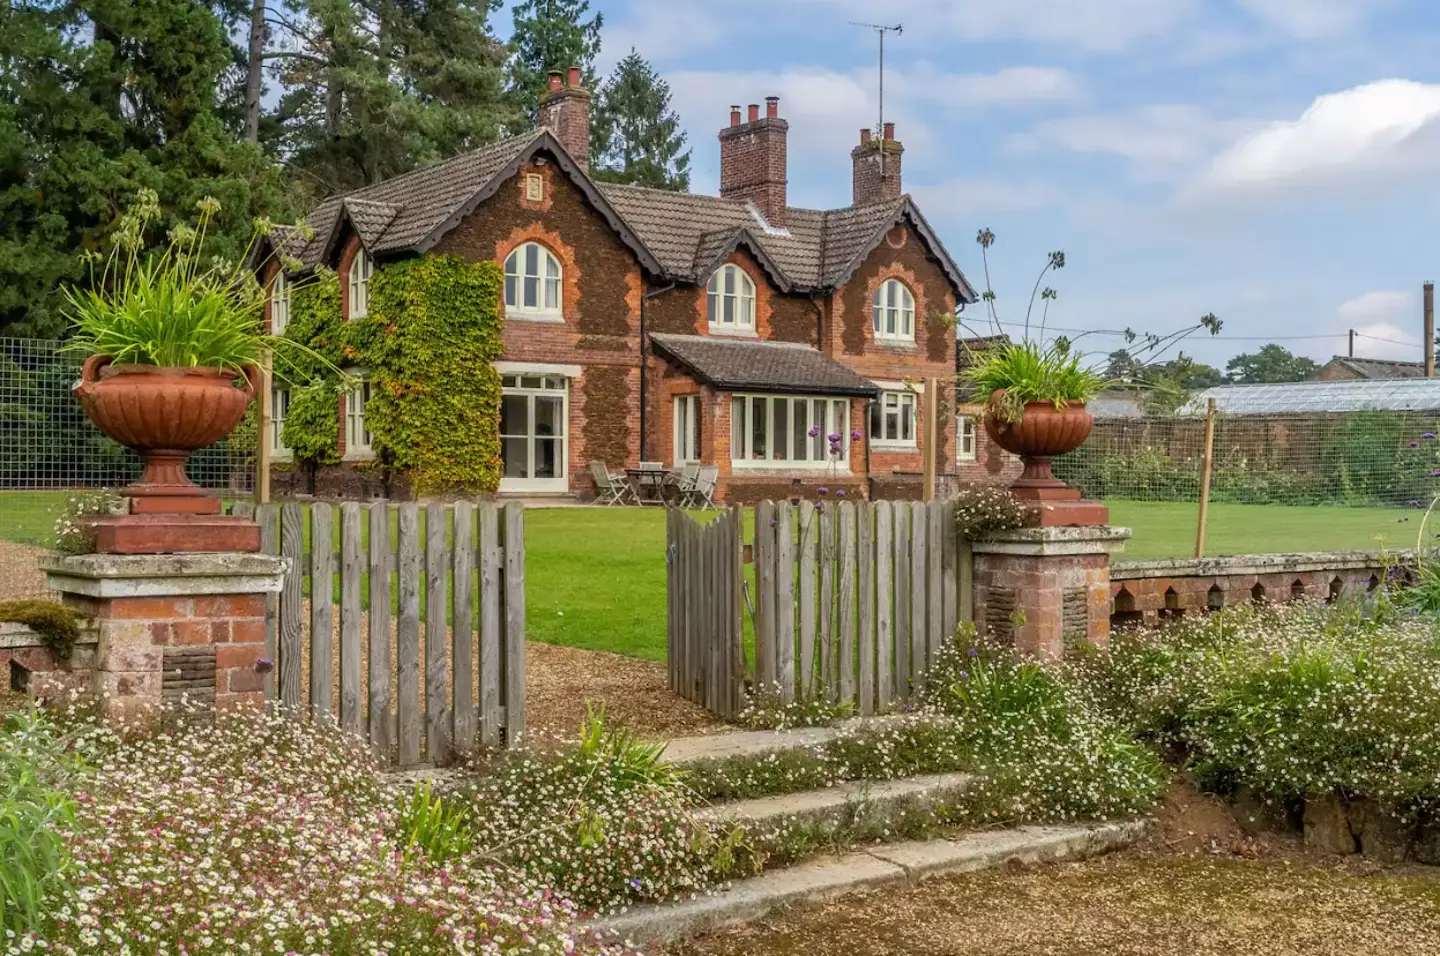 A stunning cottage on the Queen’s Sandringham Estate was listed to rent on Airbnb just hours before Her Majesty’s death.